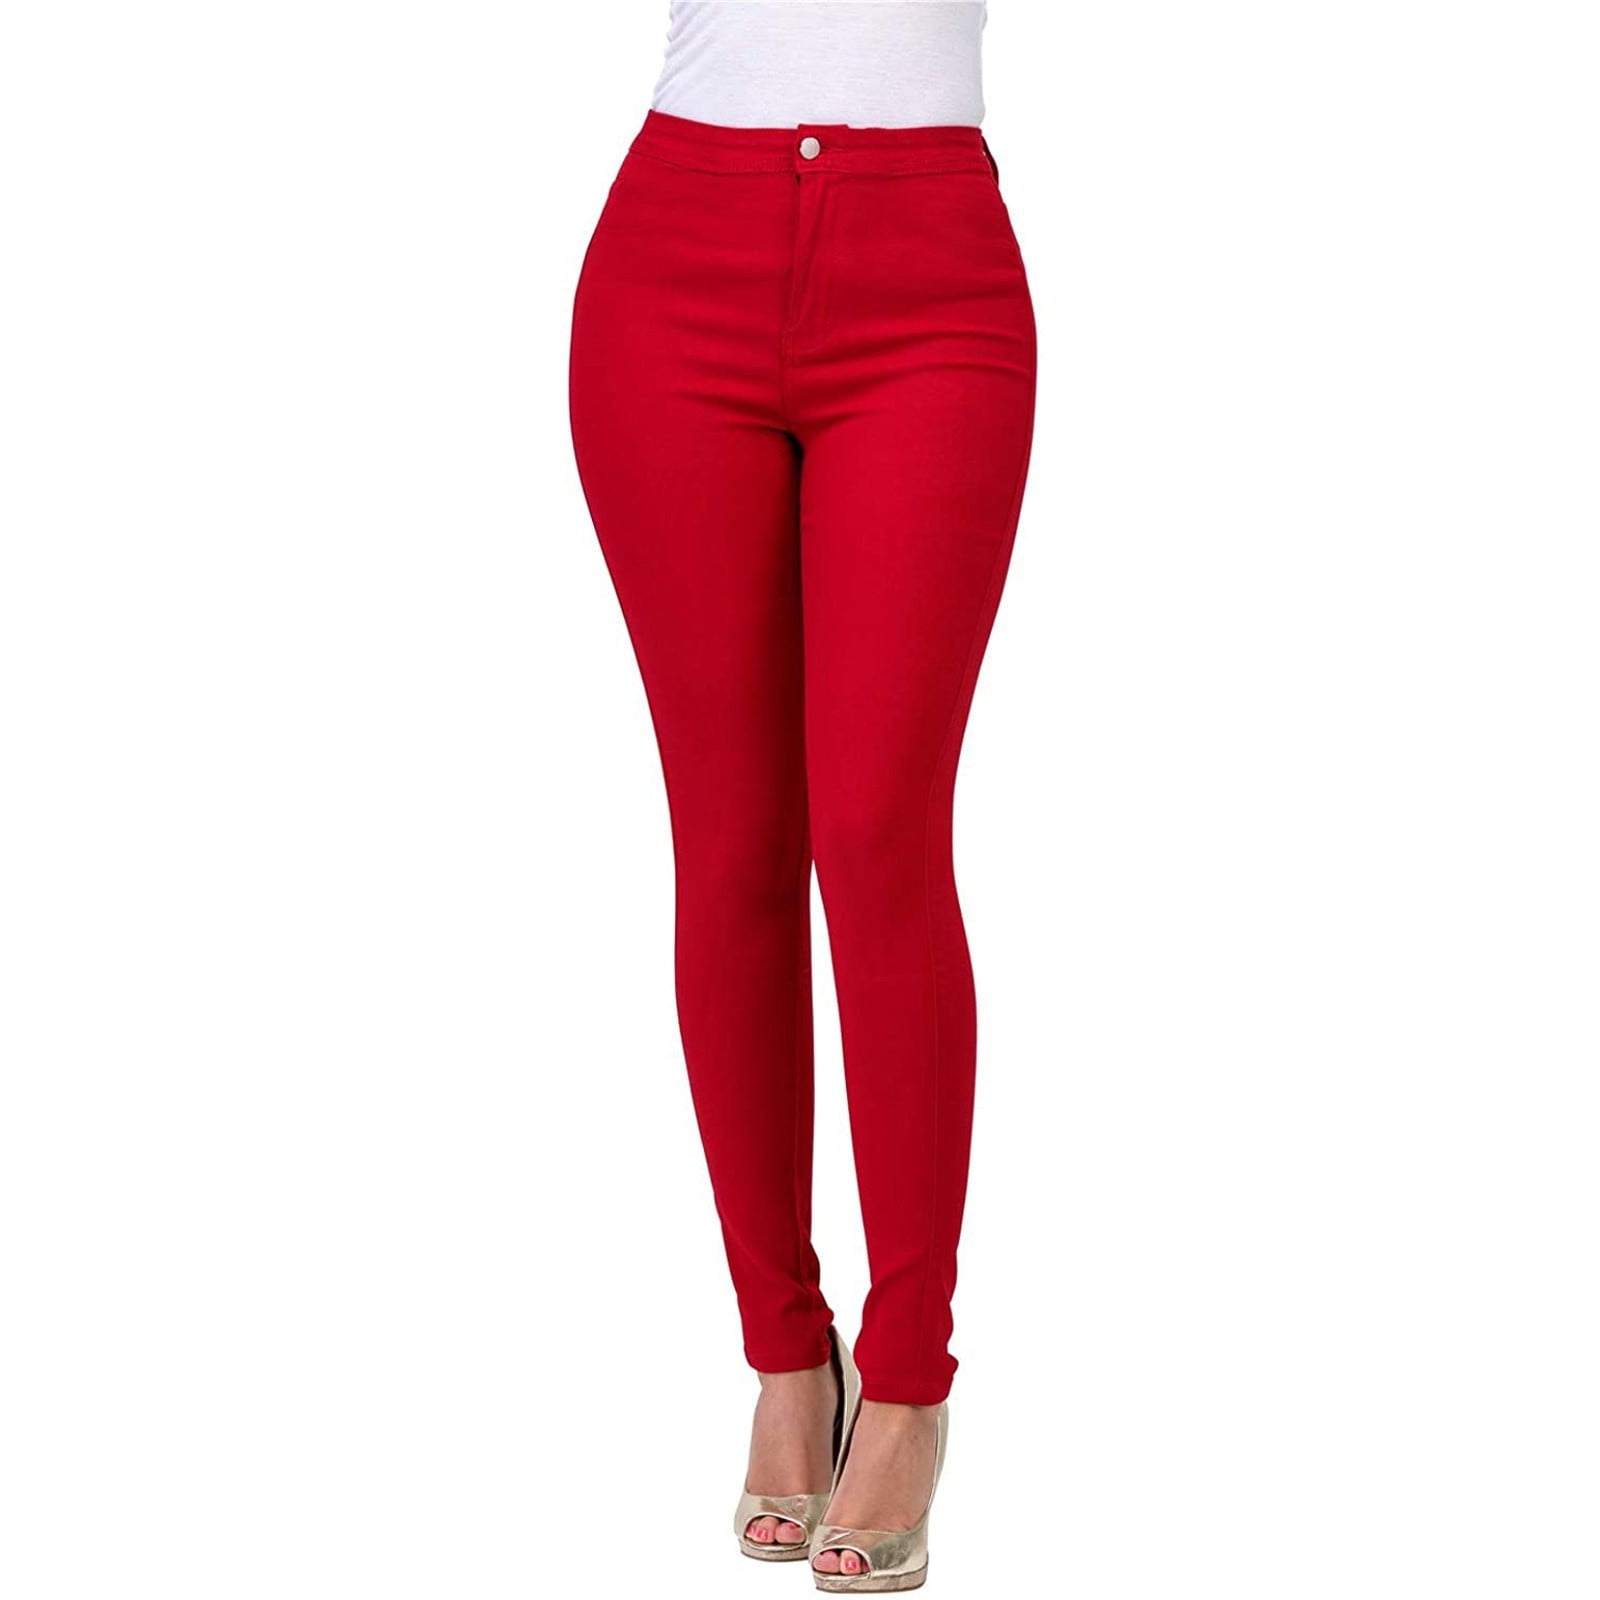 JNGSA Stretchy Jeans for Women,Red Jeans for Women Slimming